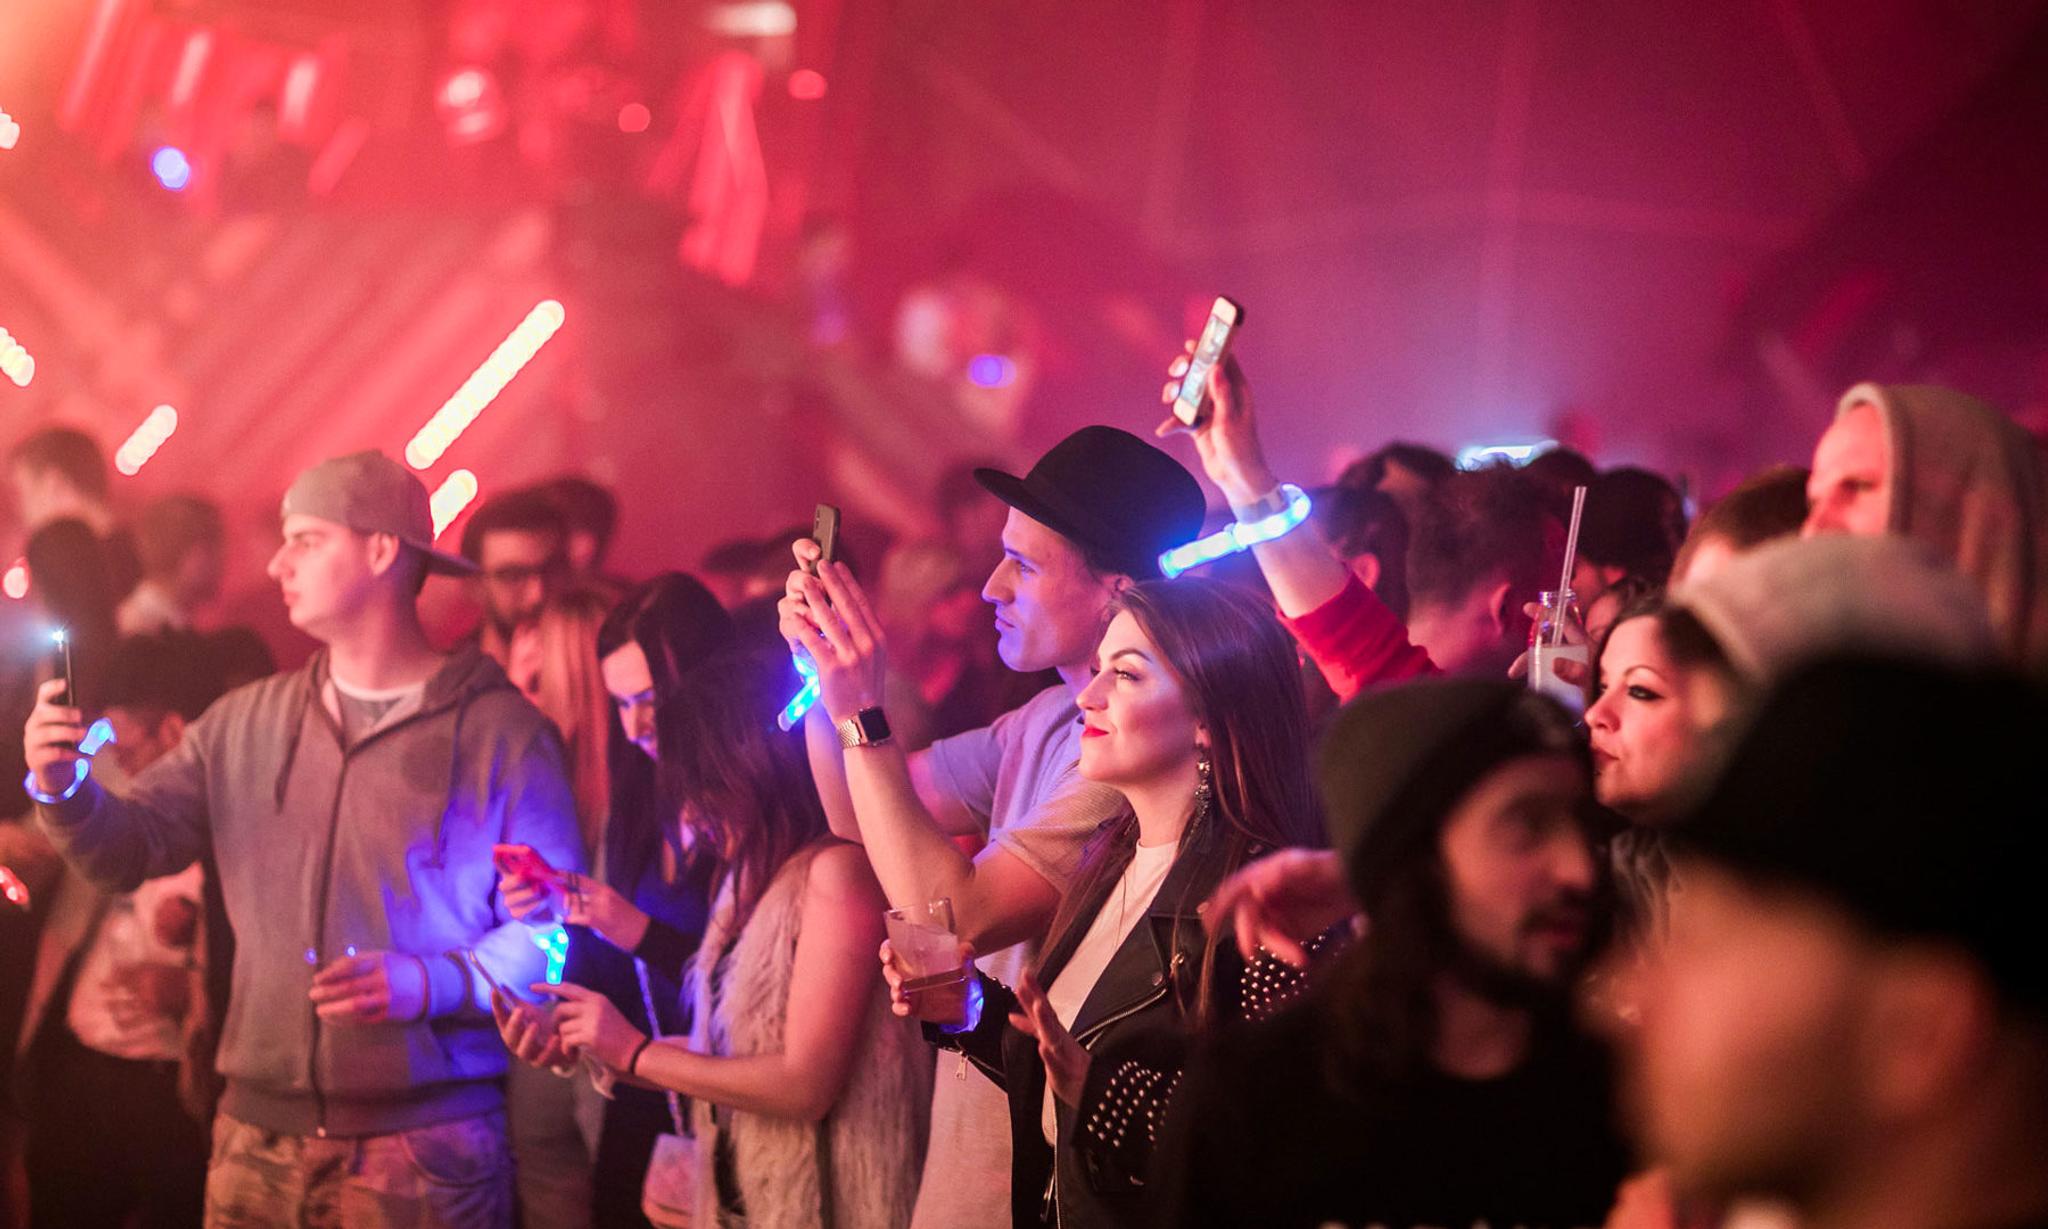 Partygoers in glowing white wristbands socialize and photograph their surroundings in a club environment.